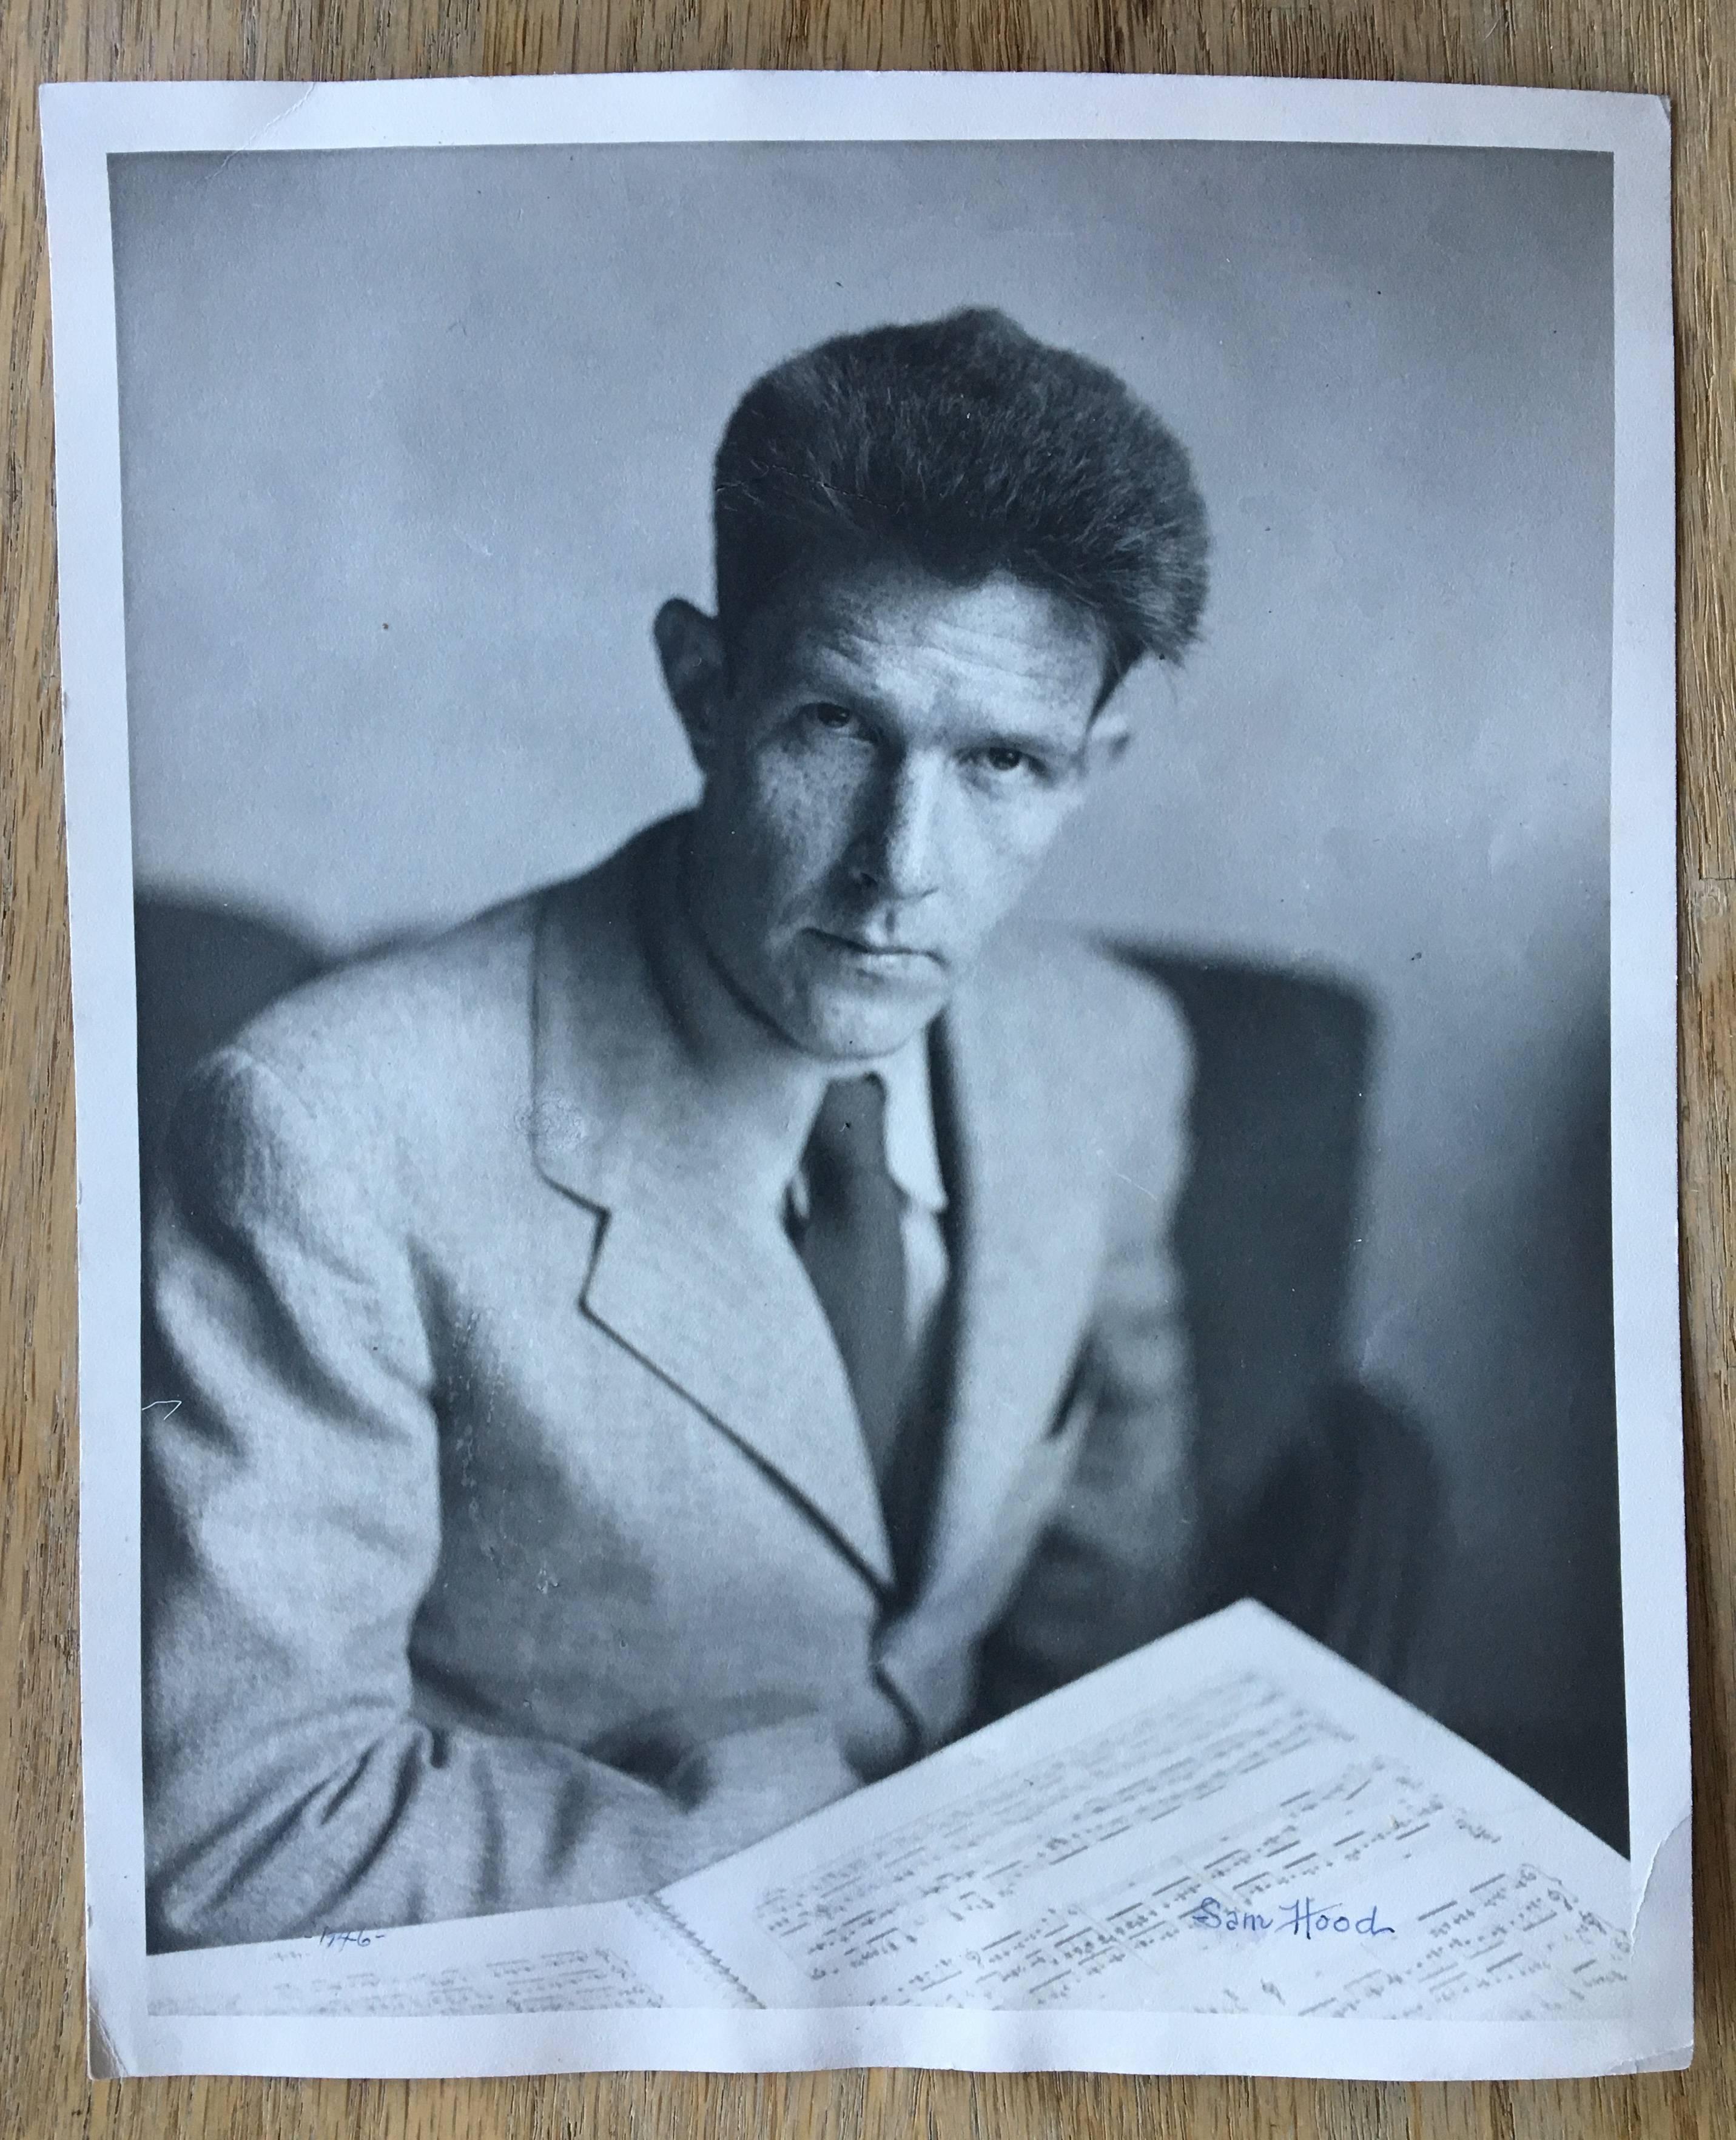 This is a very rare opportunity to own a portrait of John Cage taken by photographer Sam Hood for the Pittsburgh Post-Gazette in 1946. This is probably the only known example. Signed.